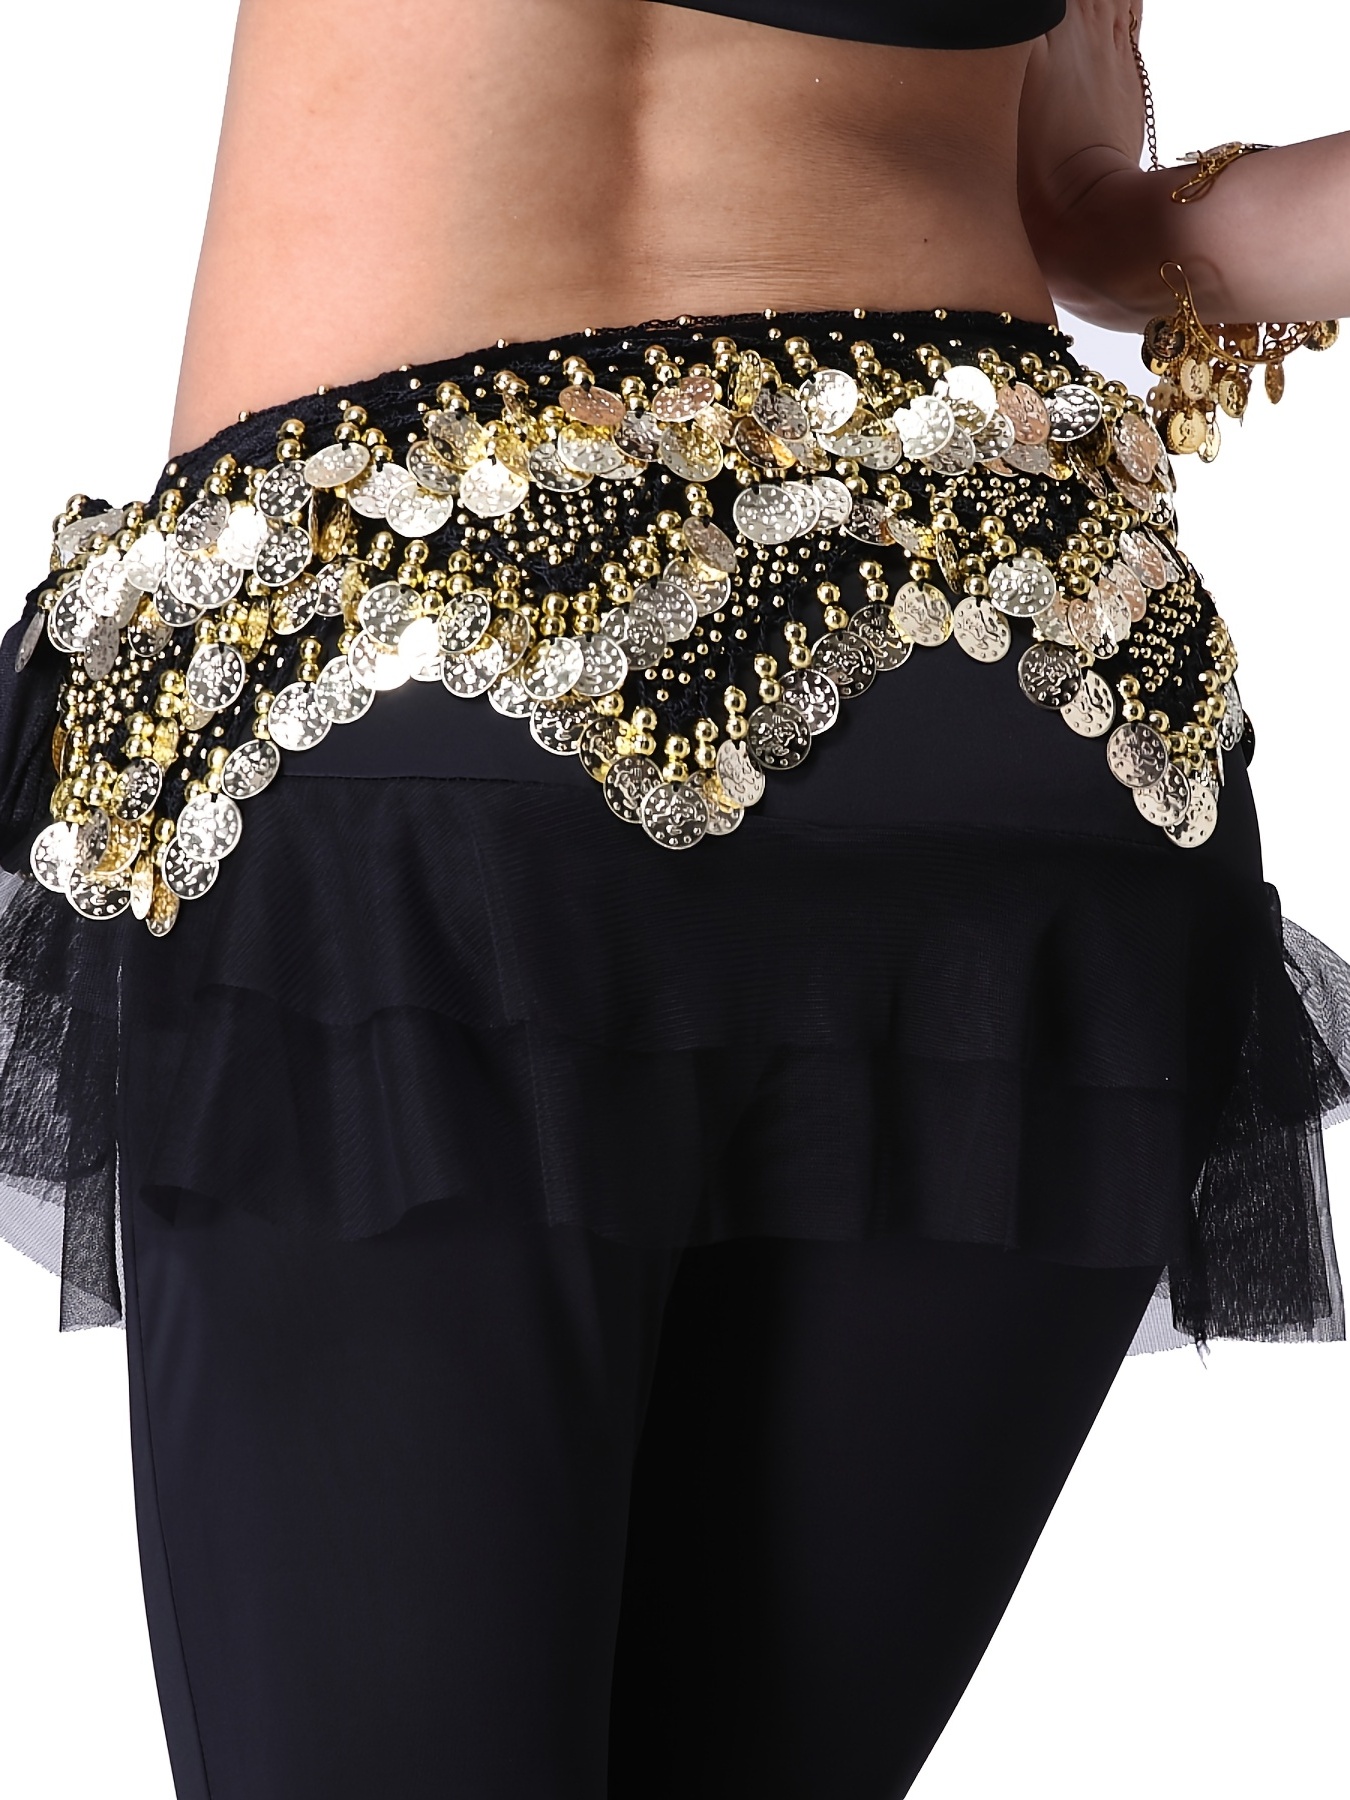 Women's Belly Dance Hip Scarf Performance Outfits Skirt Festival Clothing, gold,F114303 